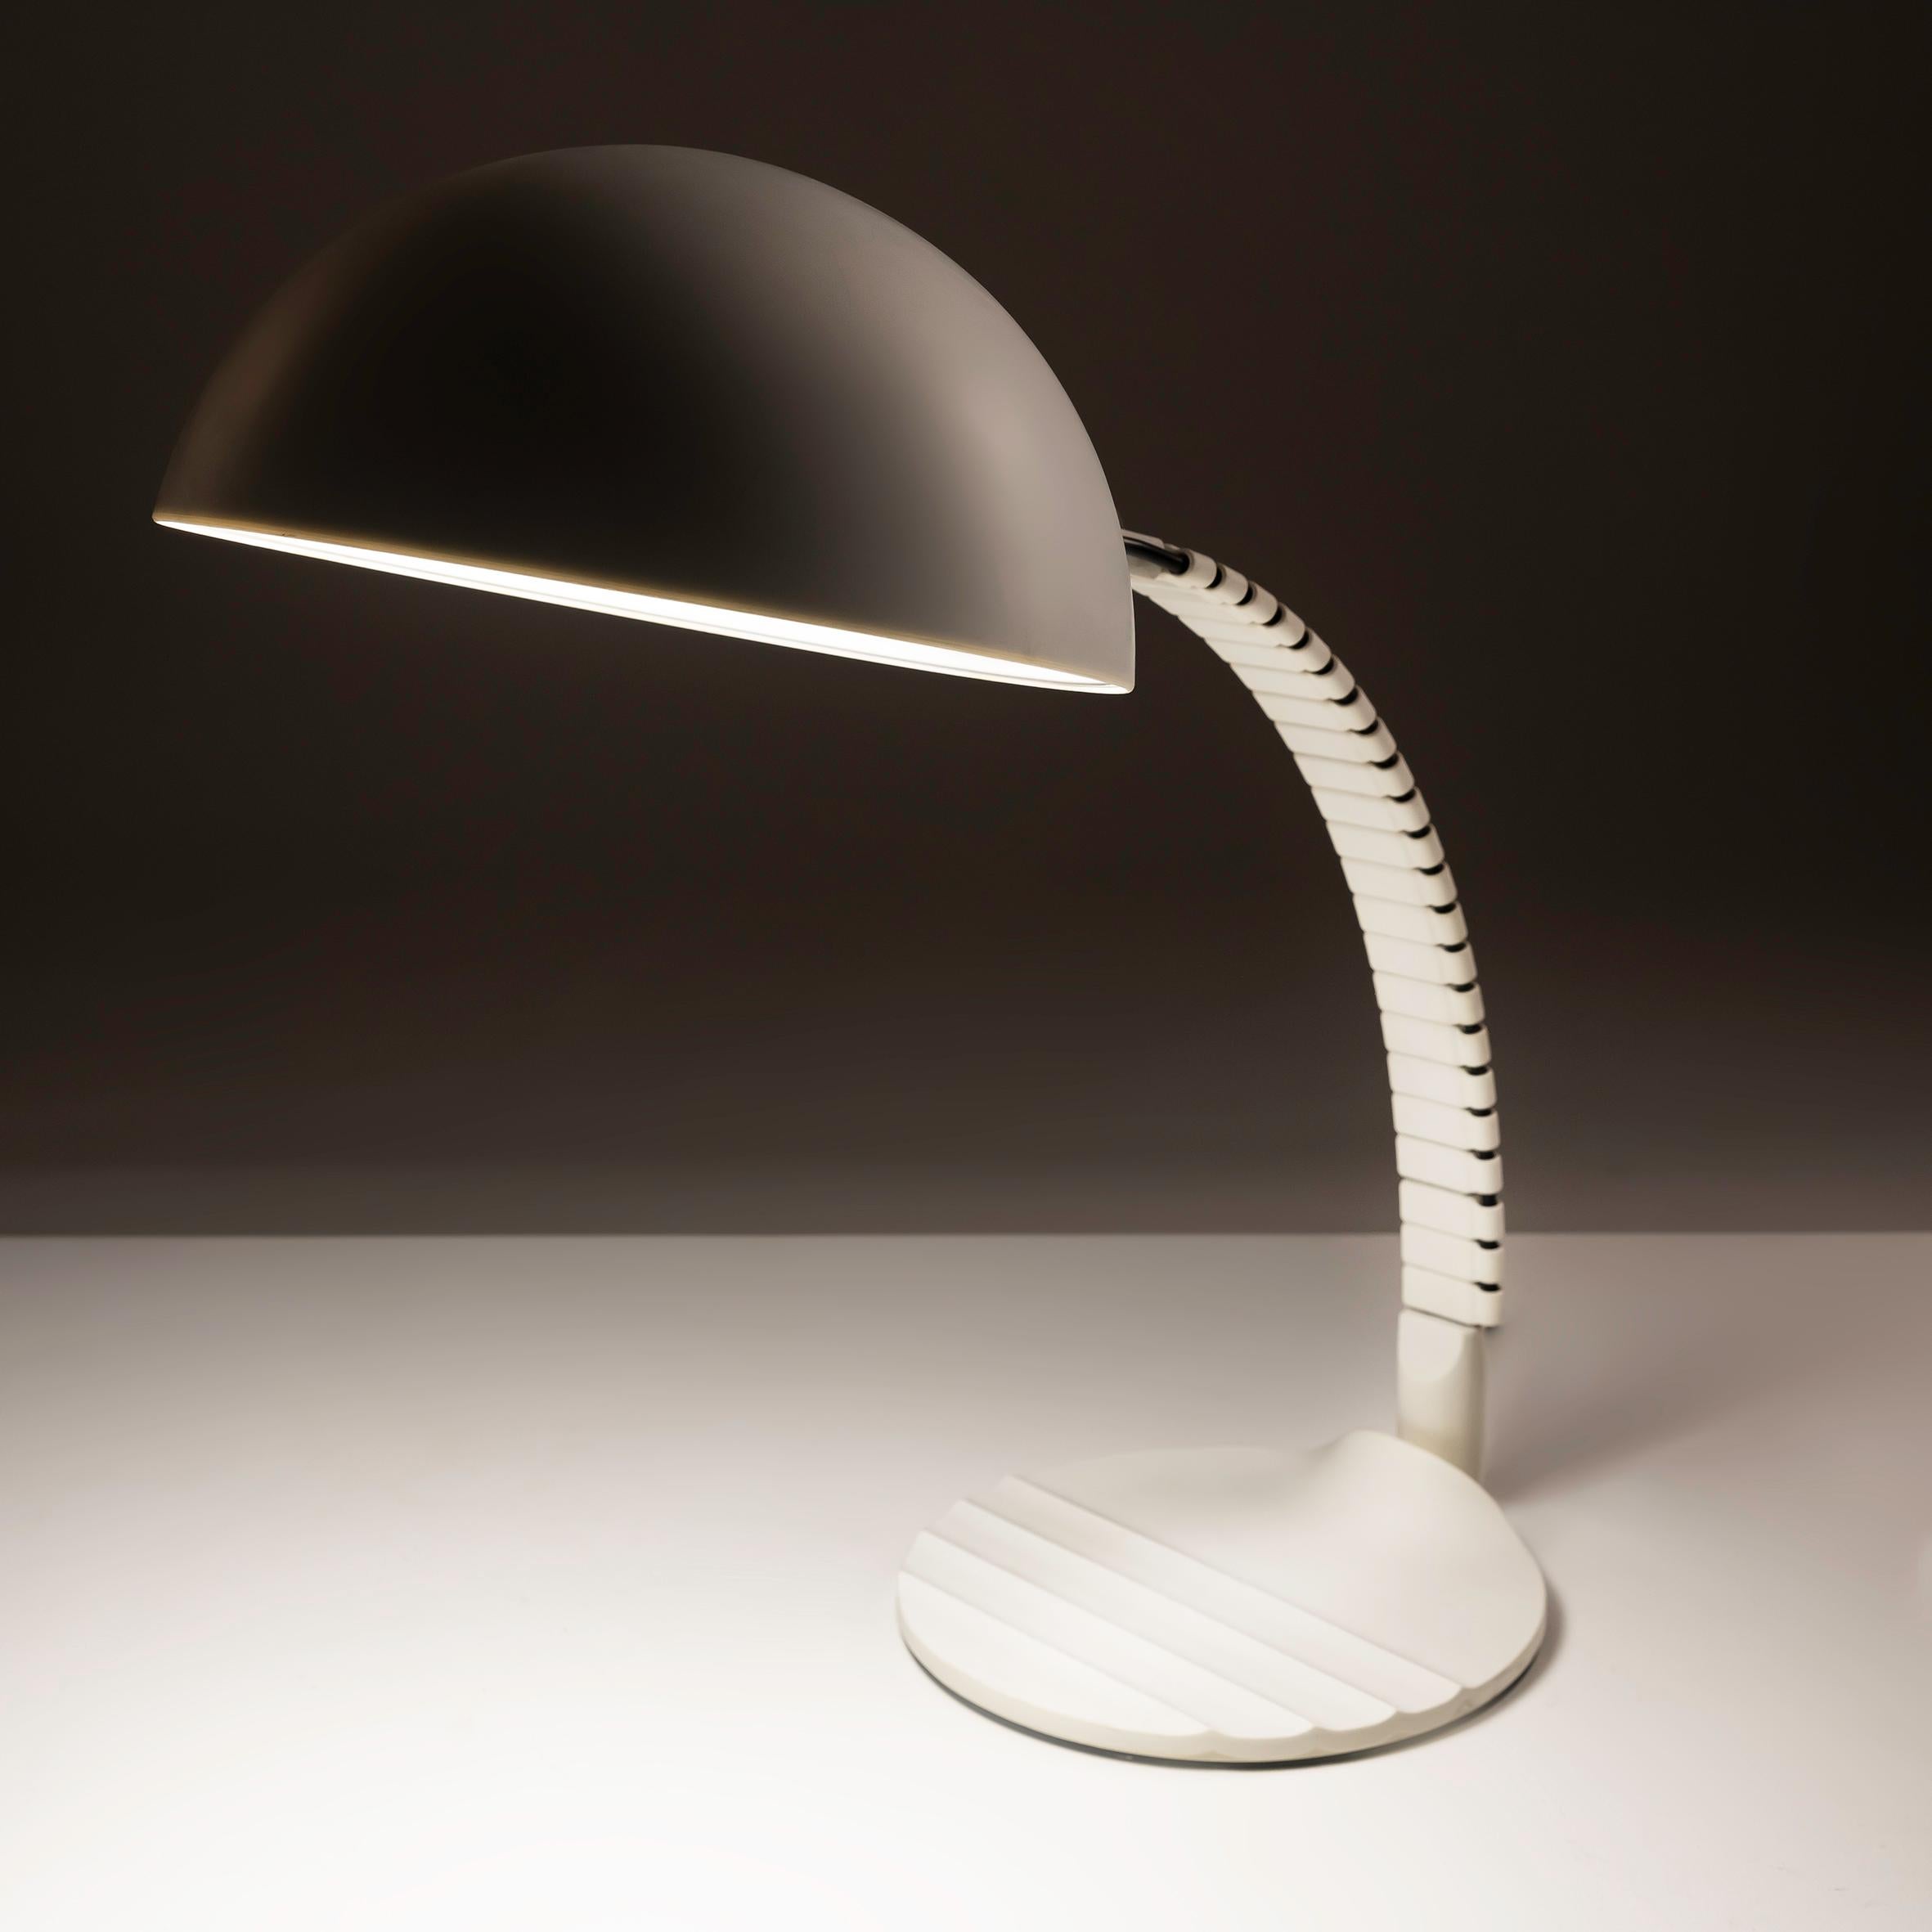 European Italian Lamp by Elio Martinelli for Martinelli Luce, No 660, Italy 1970s For Sale